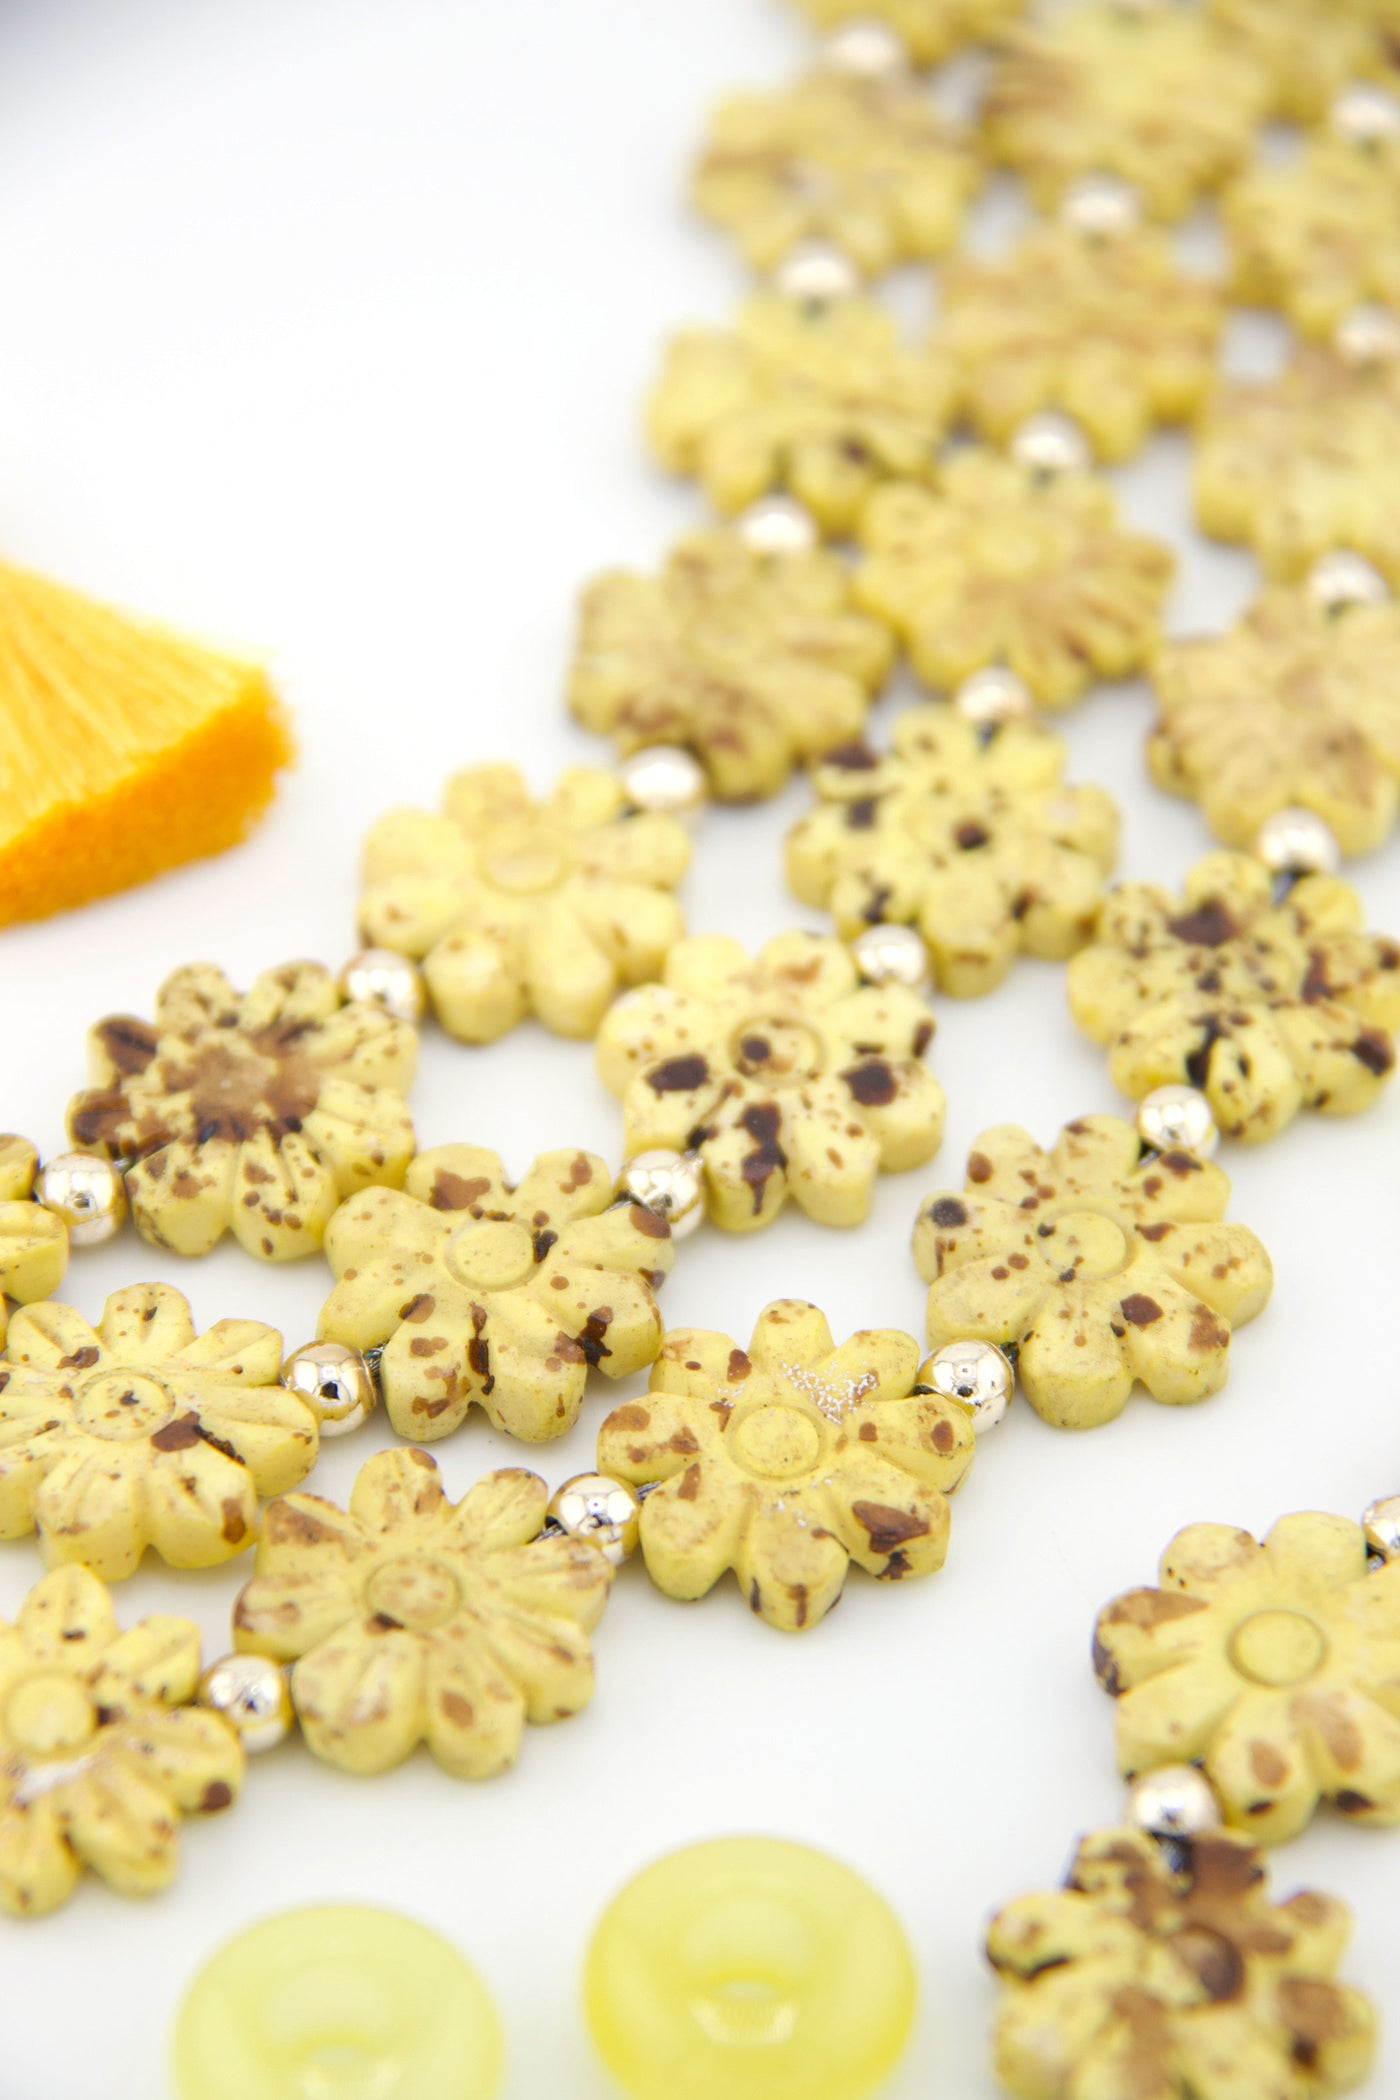 Yellow Daisy Hand Carved Flower Beads, 12mm, 11 pieces